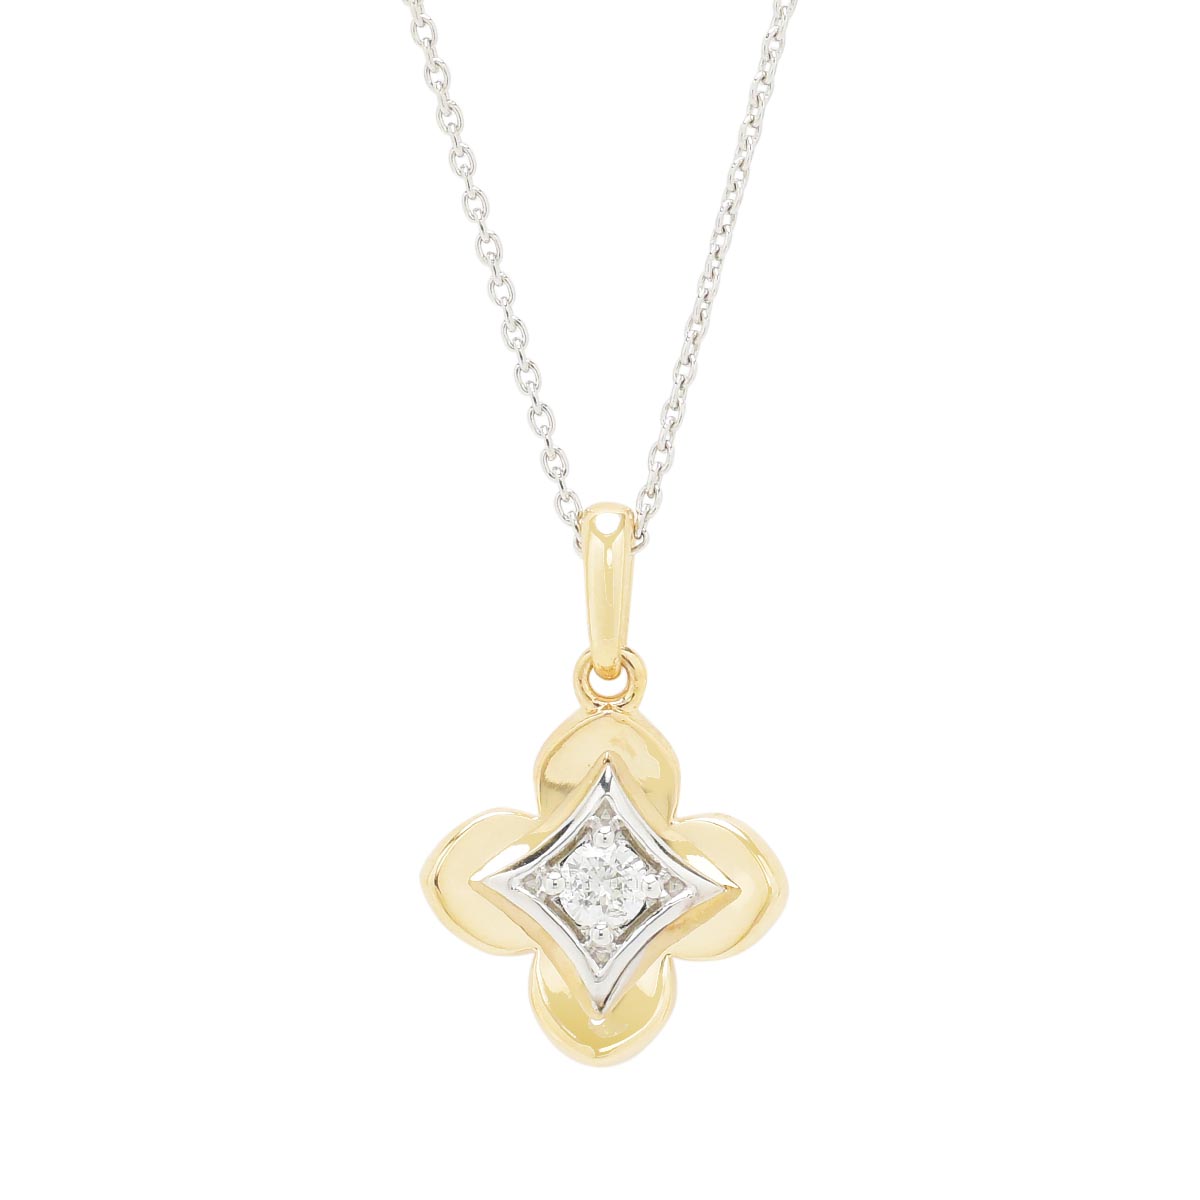 Northern Star Diamond Celestial Collection Necklace in 10kt Yellow and White Gold (1/10ct)